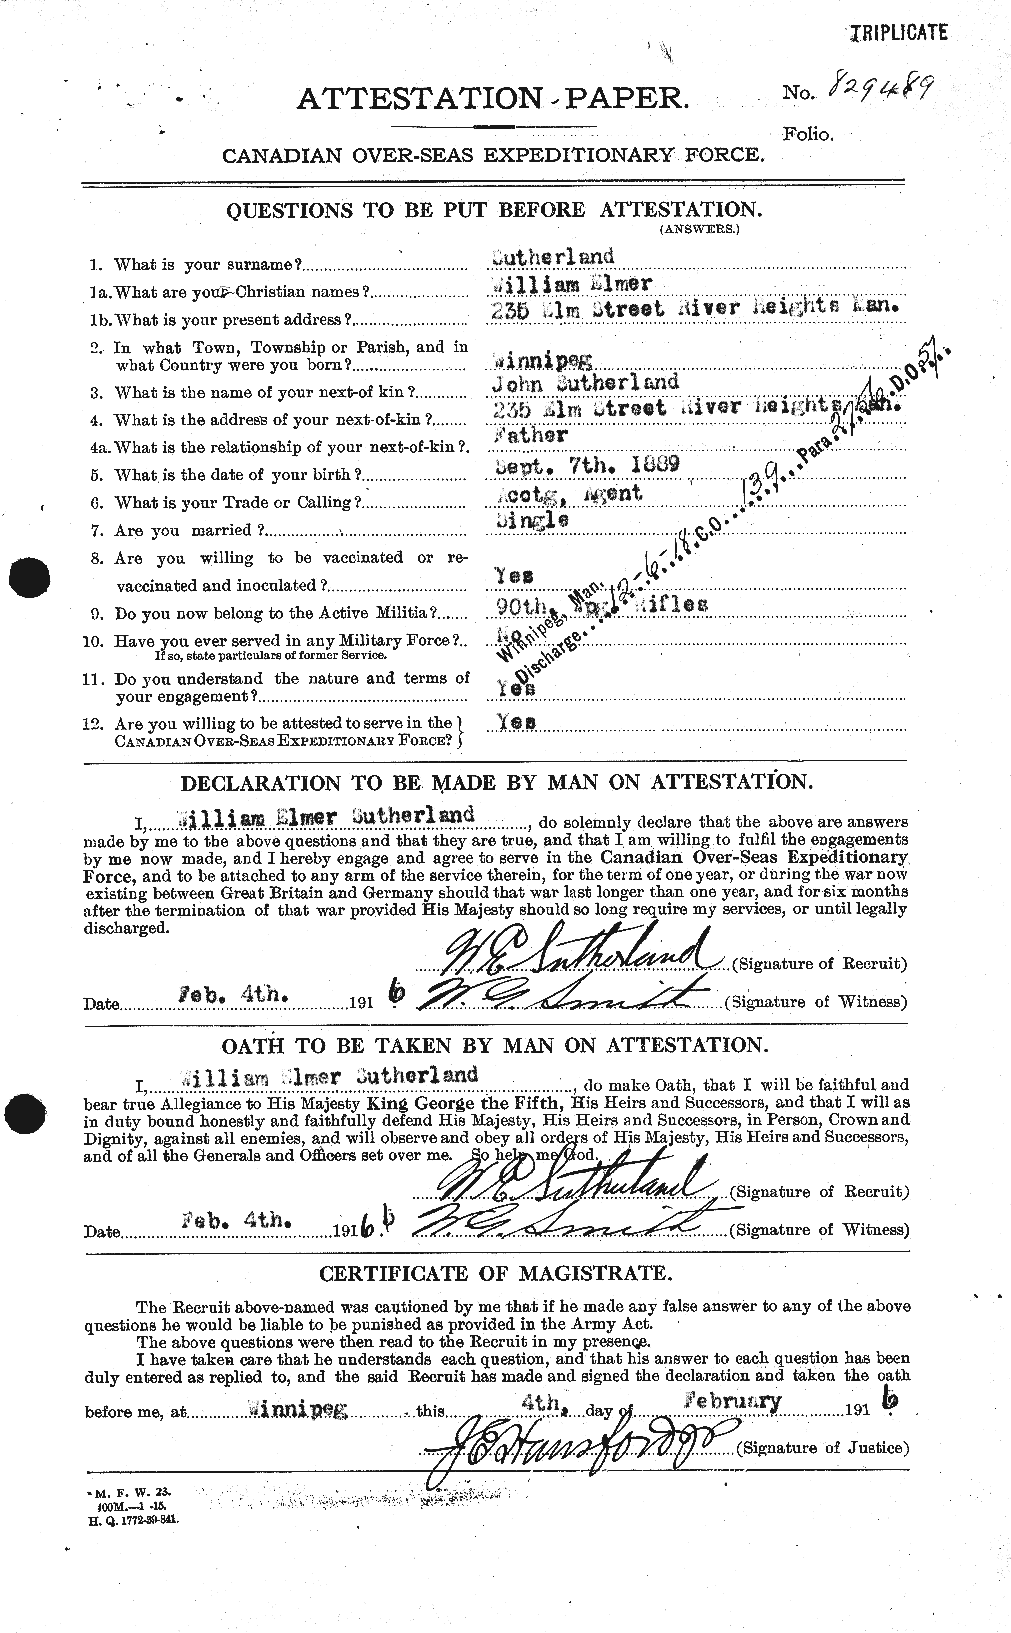 Personnel Records of the First World War - CEF 126435a